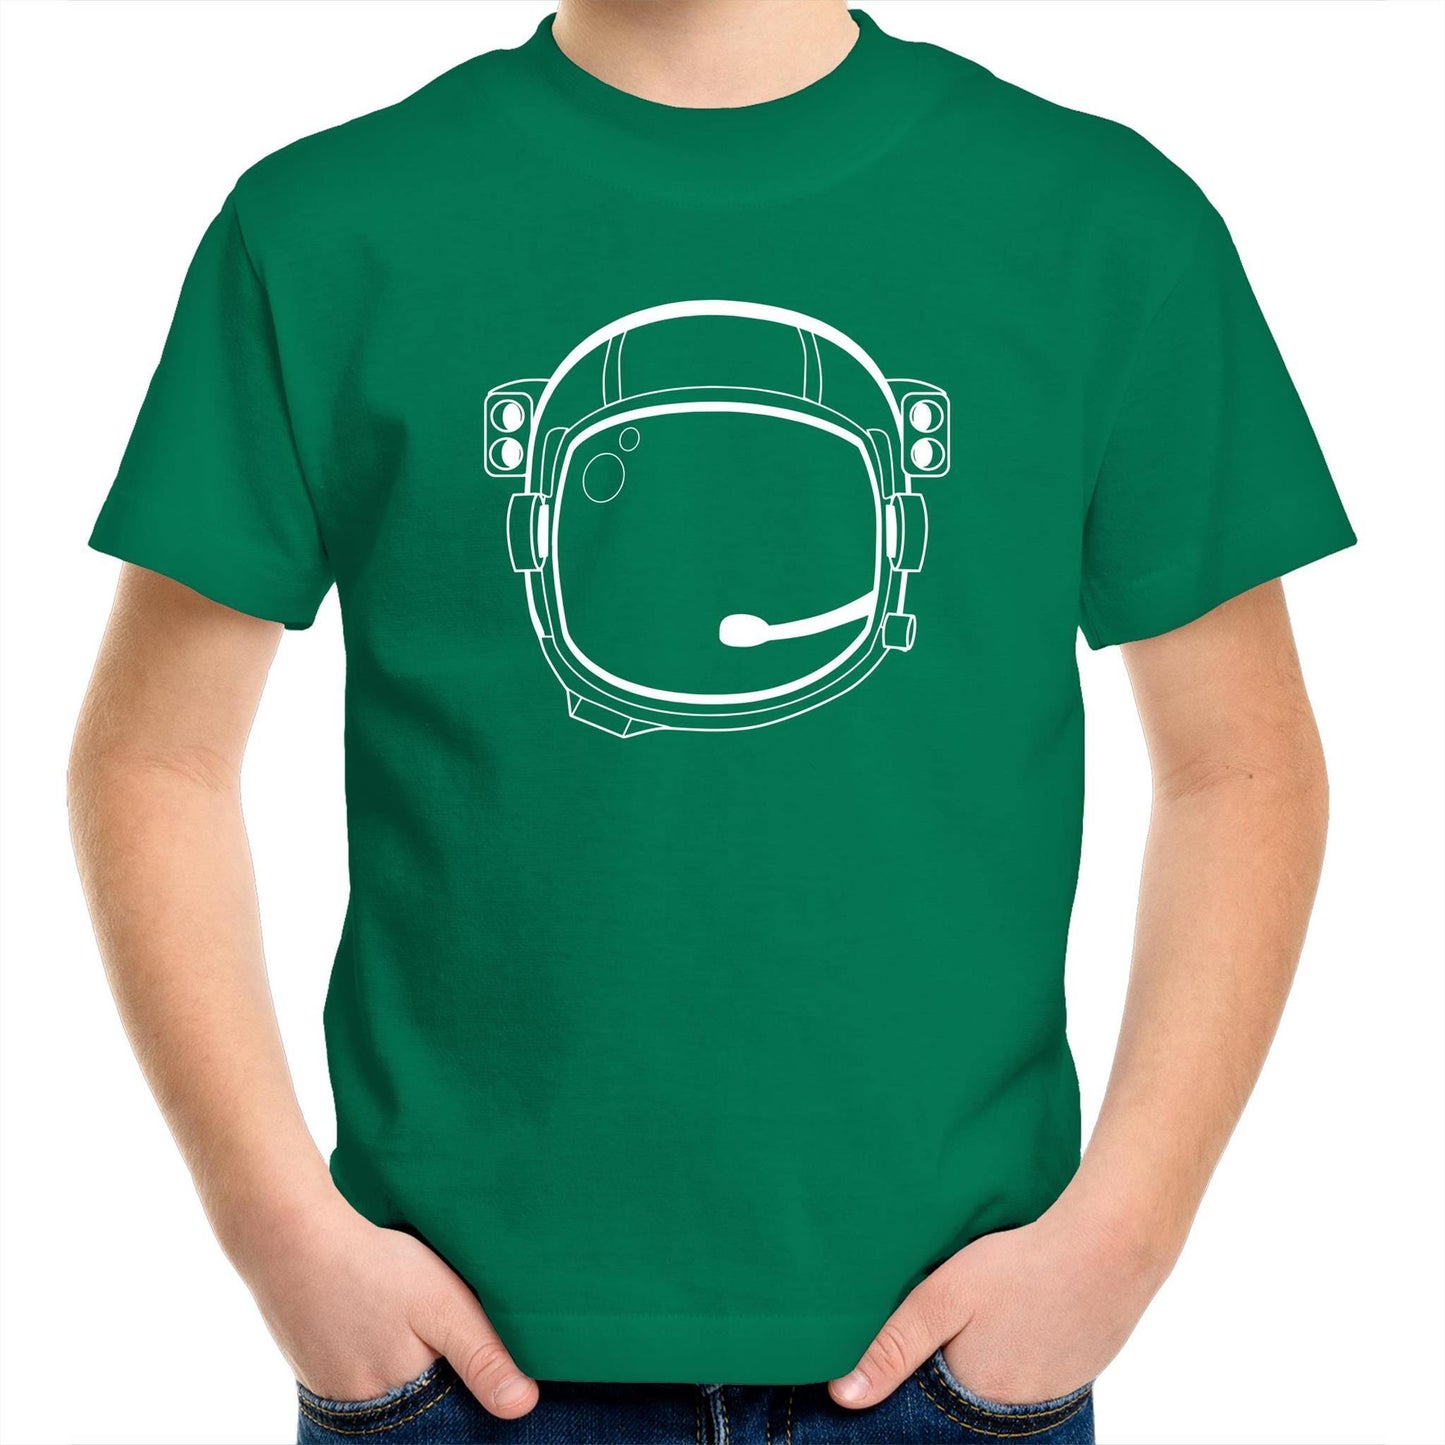 Astronaut Helmet - Kids Youth Crew T-Shirt Kelly Green Kids Youth T-shirt Space